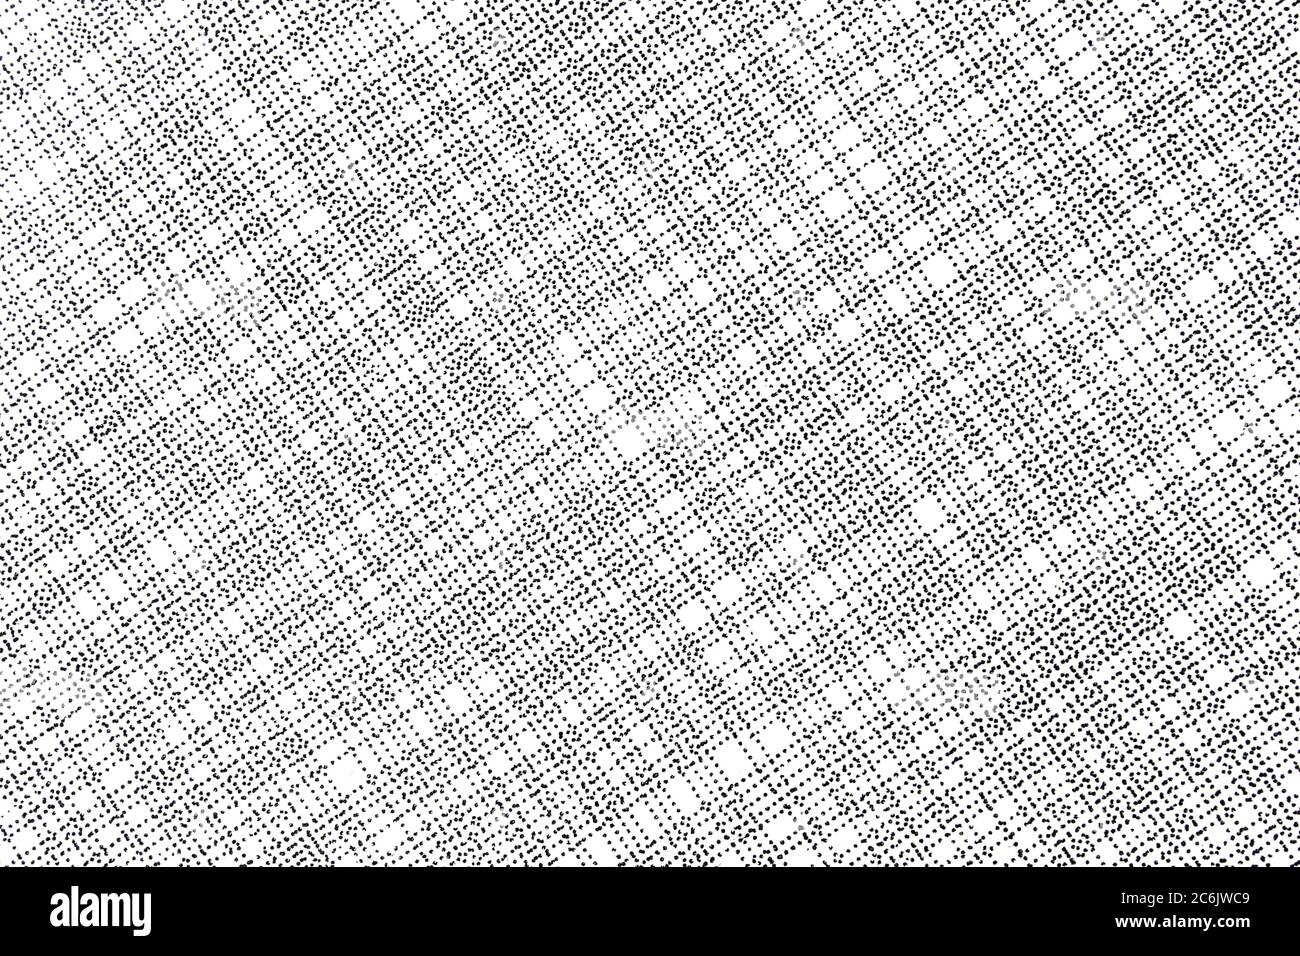 Small black dots on white background. Template, texture,grainy  pattern Stock Photo